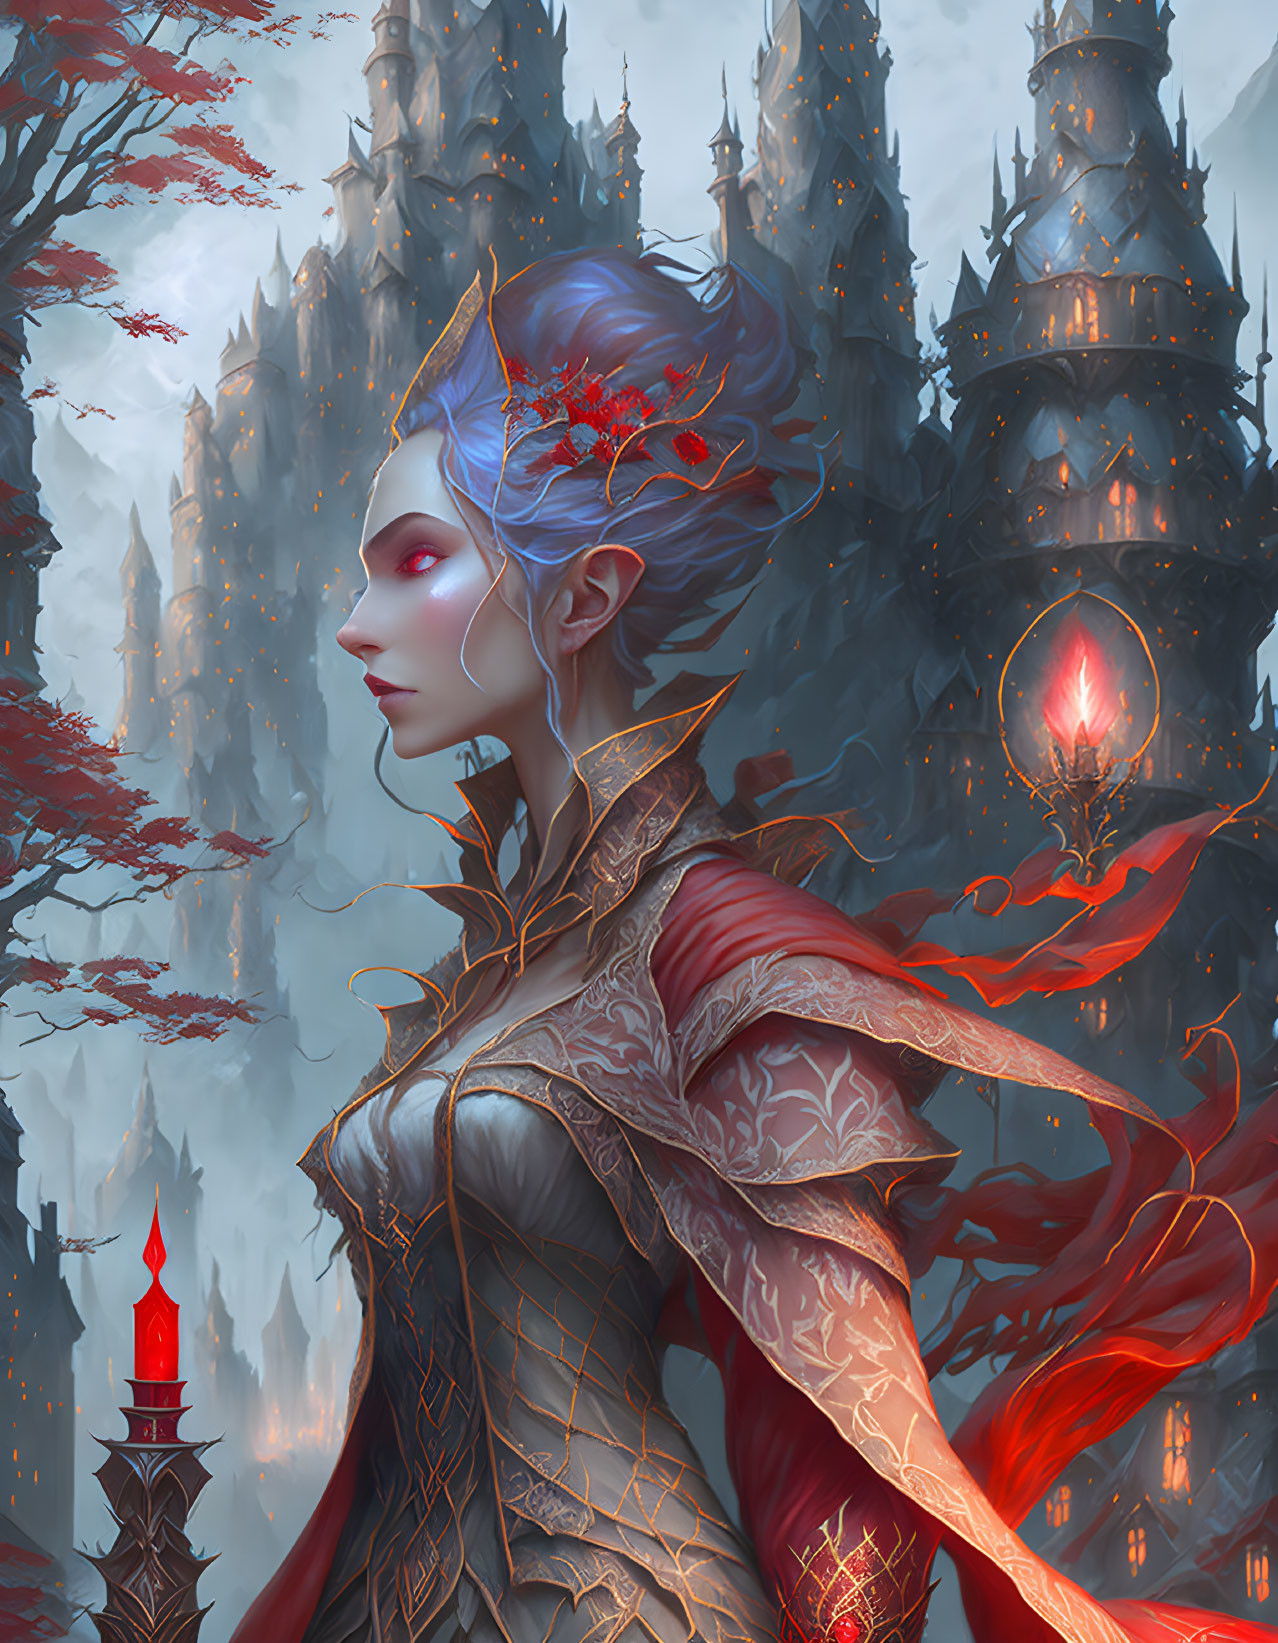 Fantasy female character with blue skin and red eyes in front of mystical castle.